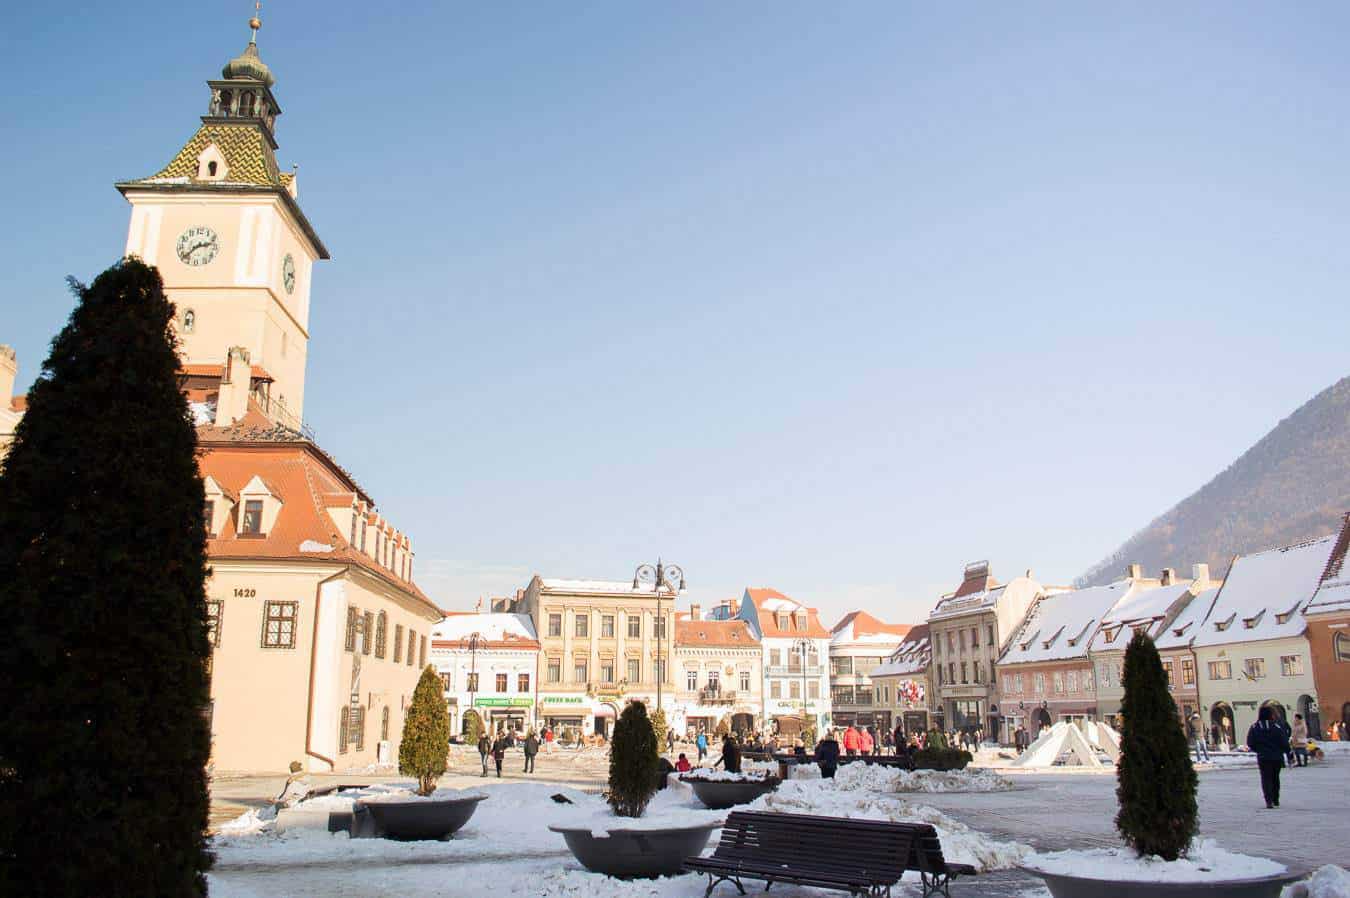 People wander around a snowy square surrounded by buildings.